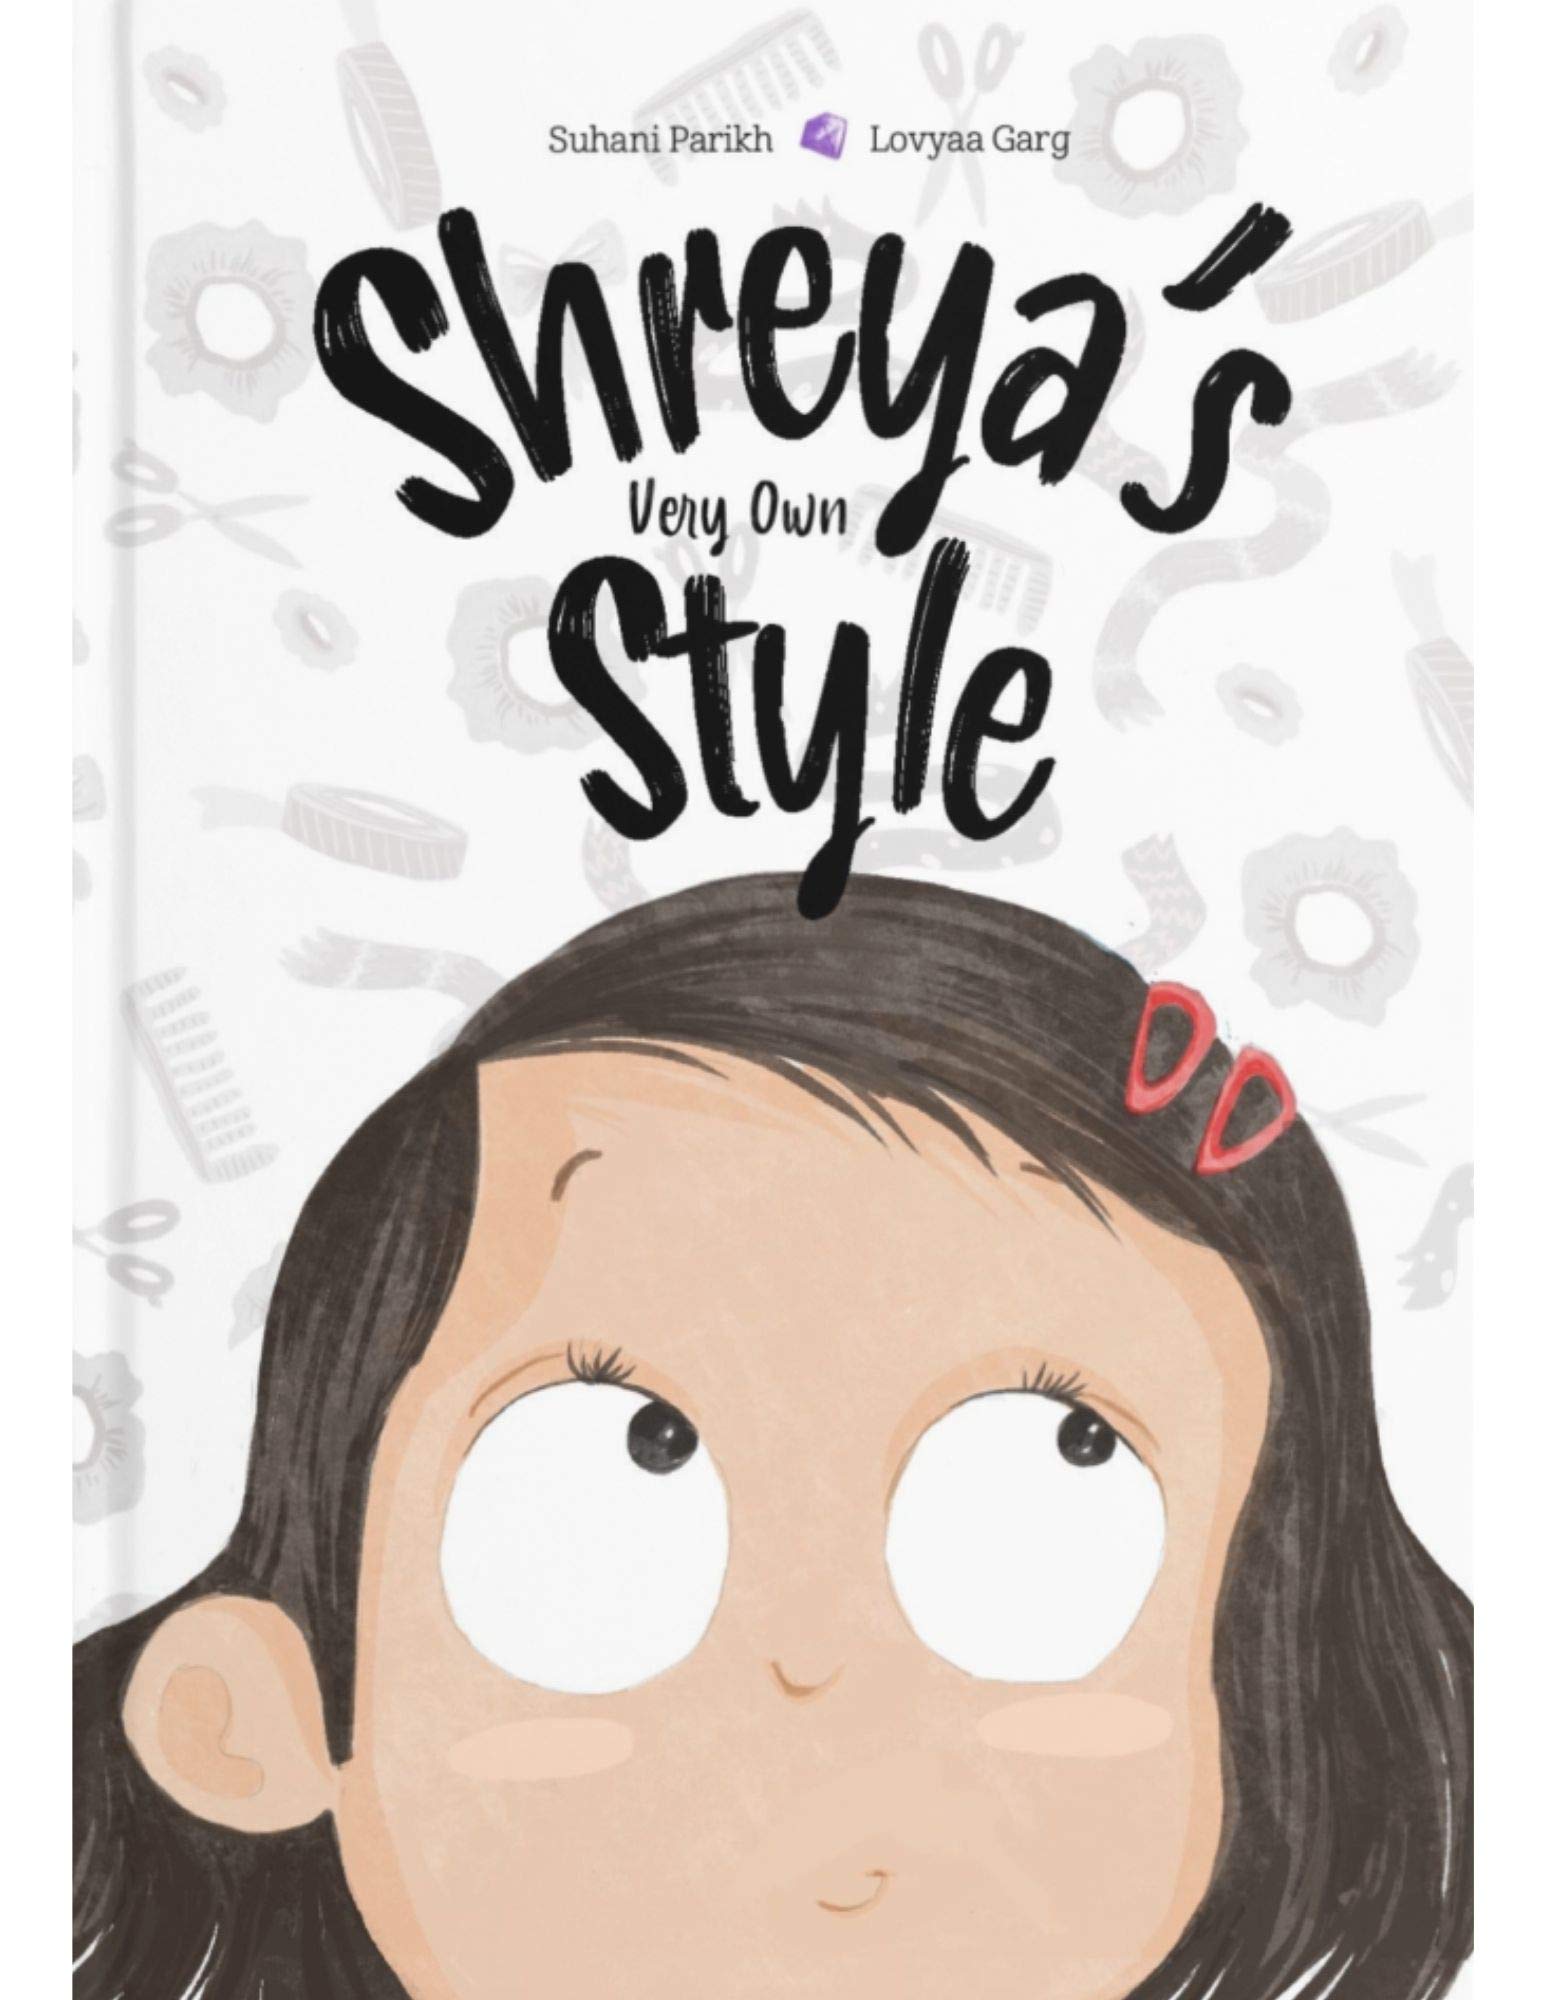 Cover art for Shreya's Very Own Style By Suhani Parikh